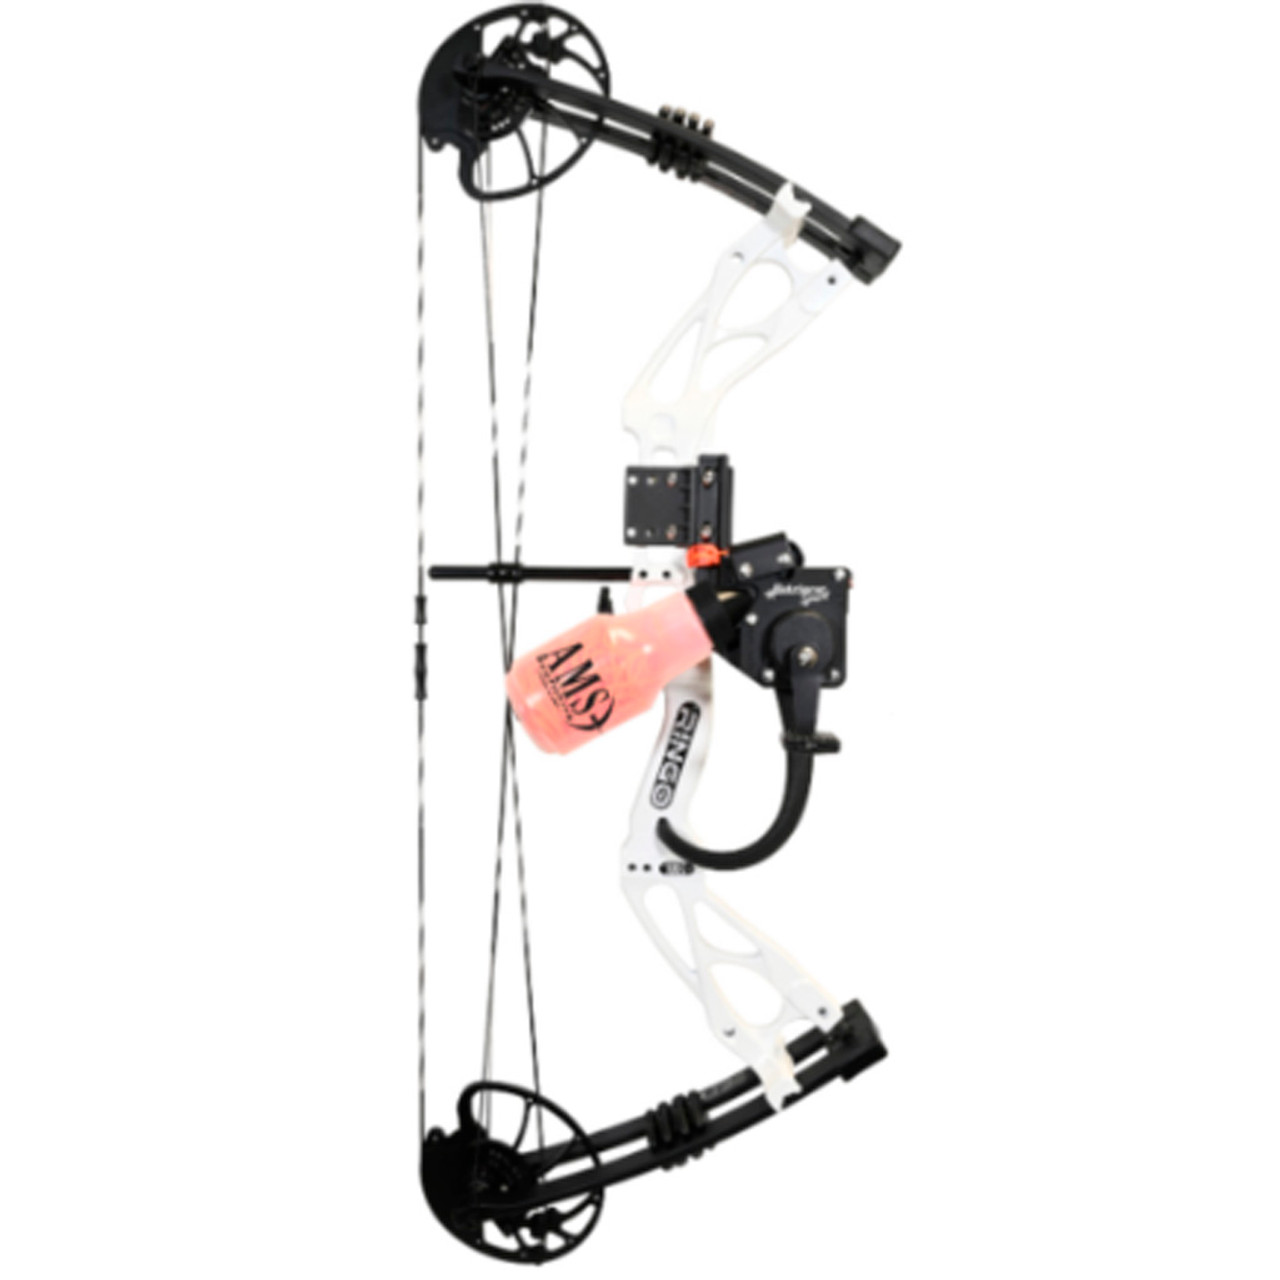 Ringo Bowfishing Bow - The ultimate in Bow Fishing